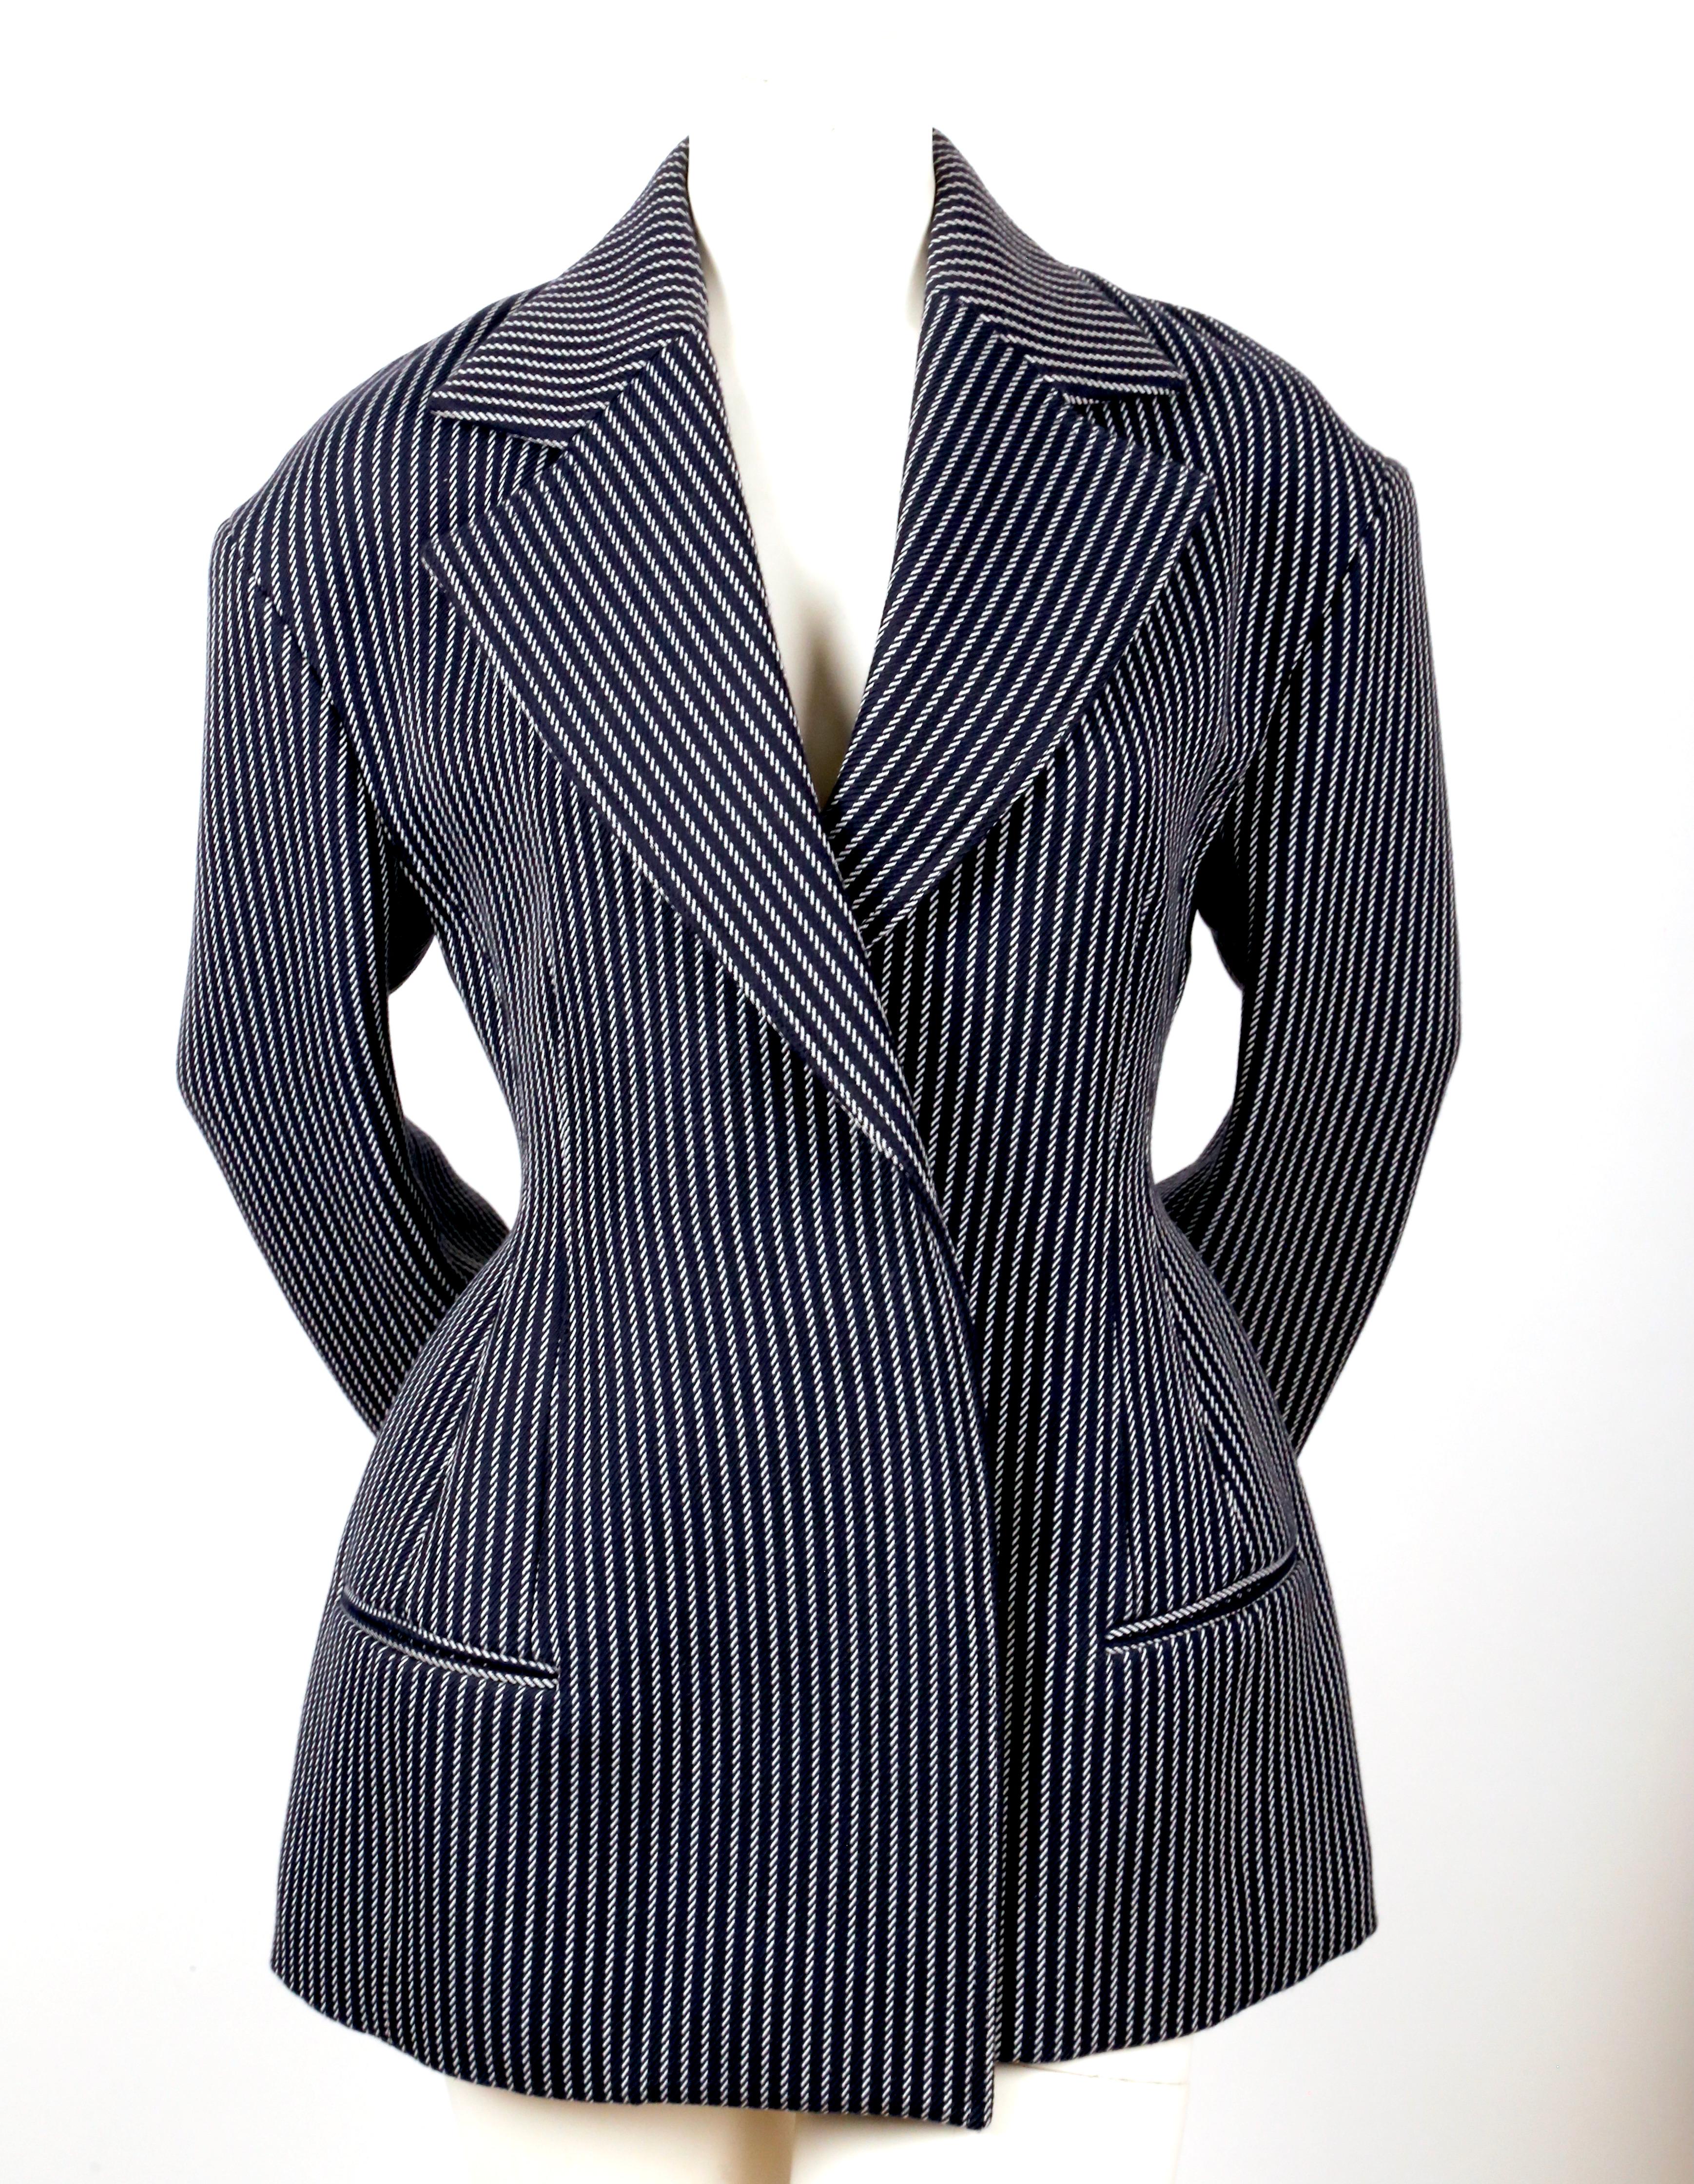 Navy blue and white, hourglass shaped jacket with open closure designed by Phoebe Philo for Celine dating to resort of 2016. French size 36. Approximate measurements (when overlapped) : drop shoulder 21